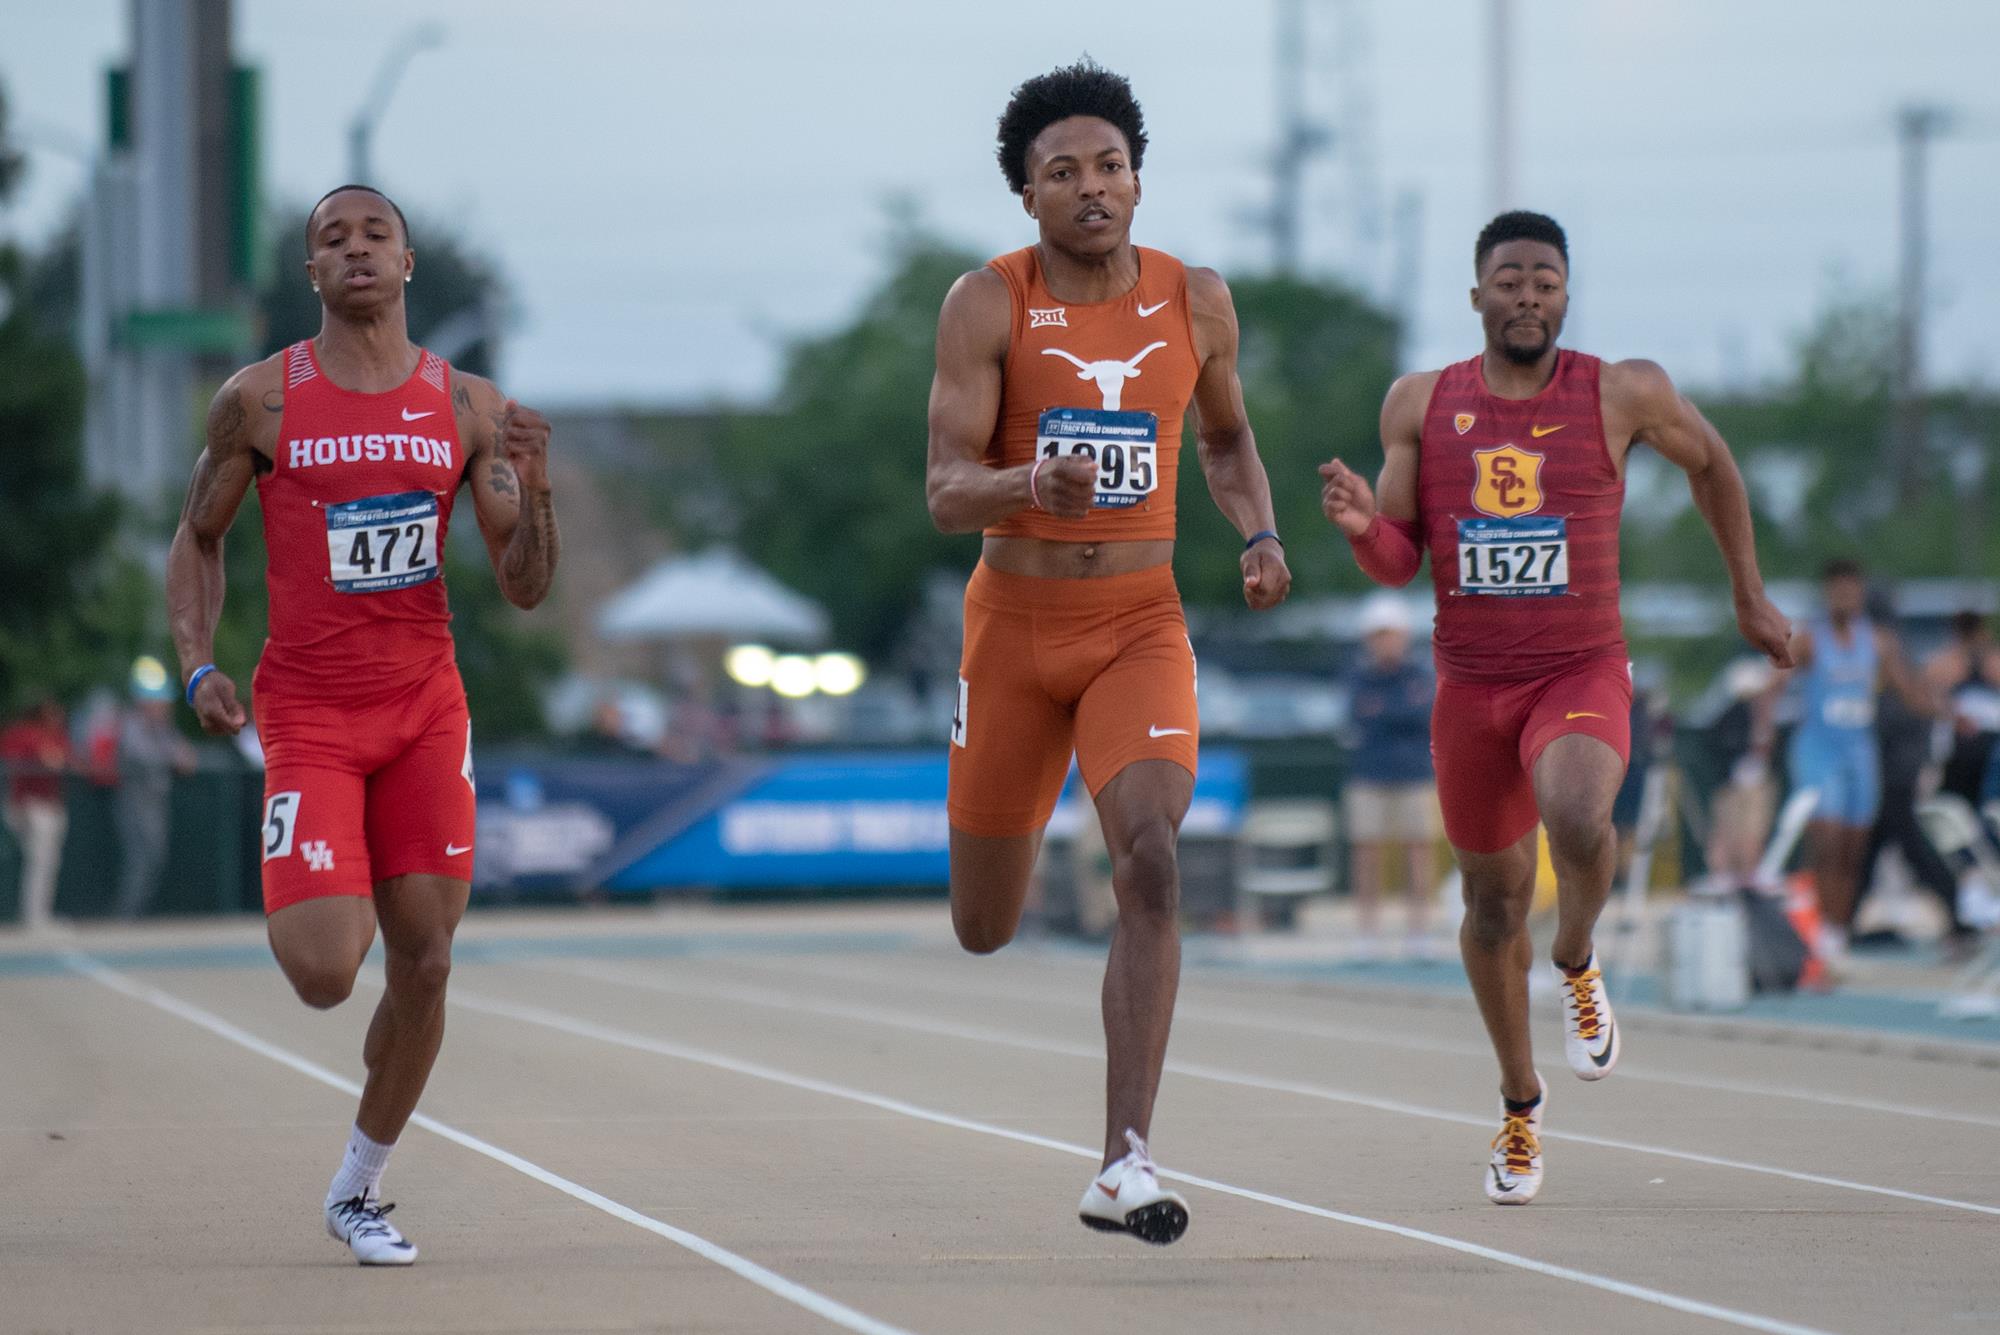 Micaiah Harris, the junior sprinter broke his own school record with a world-leading 20.49 in the 200m last weekend.